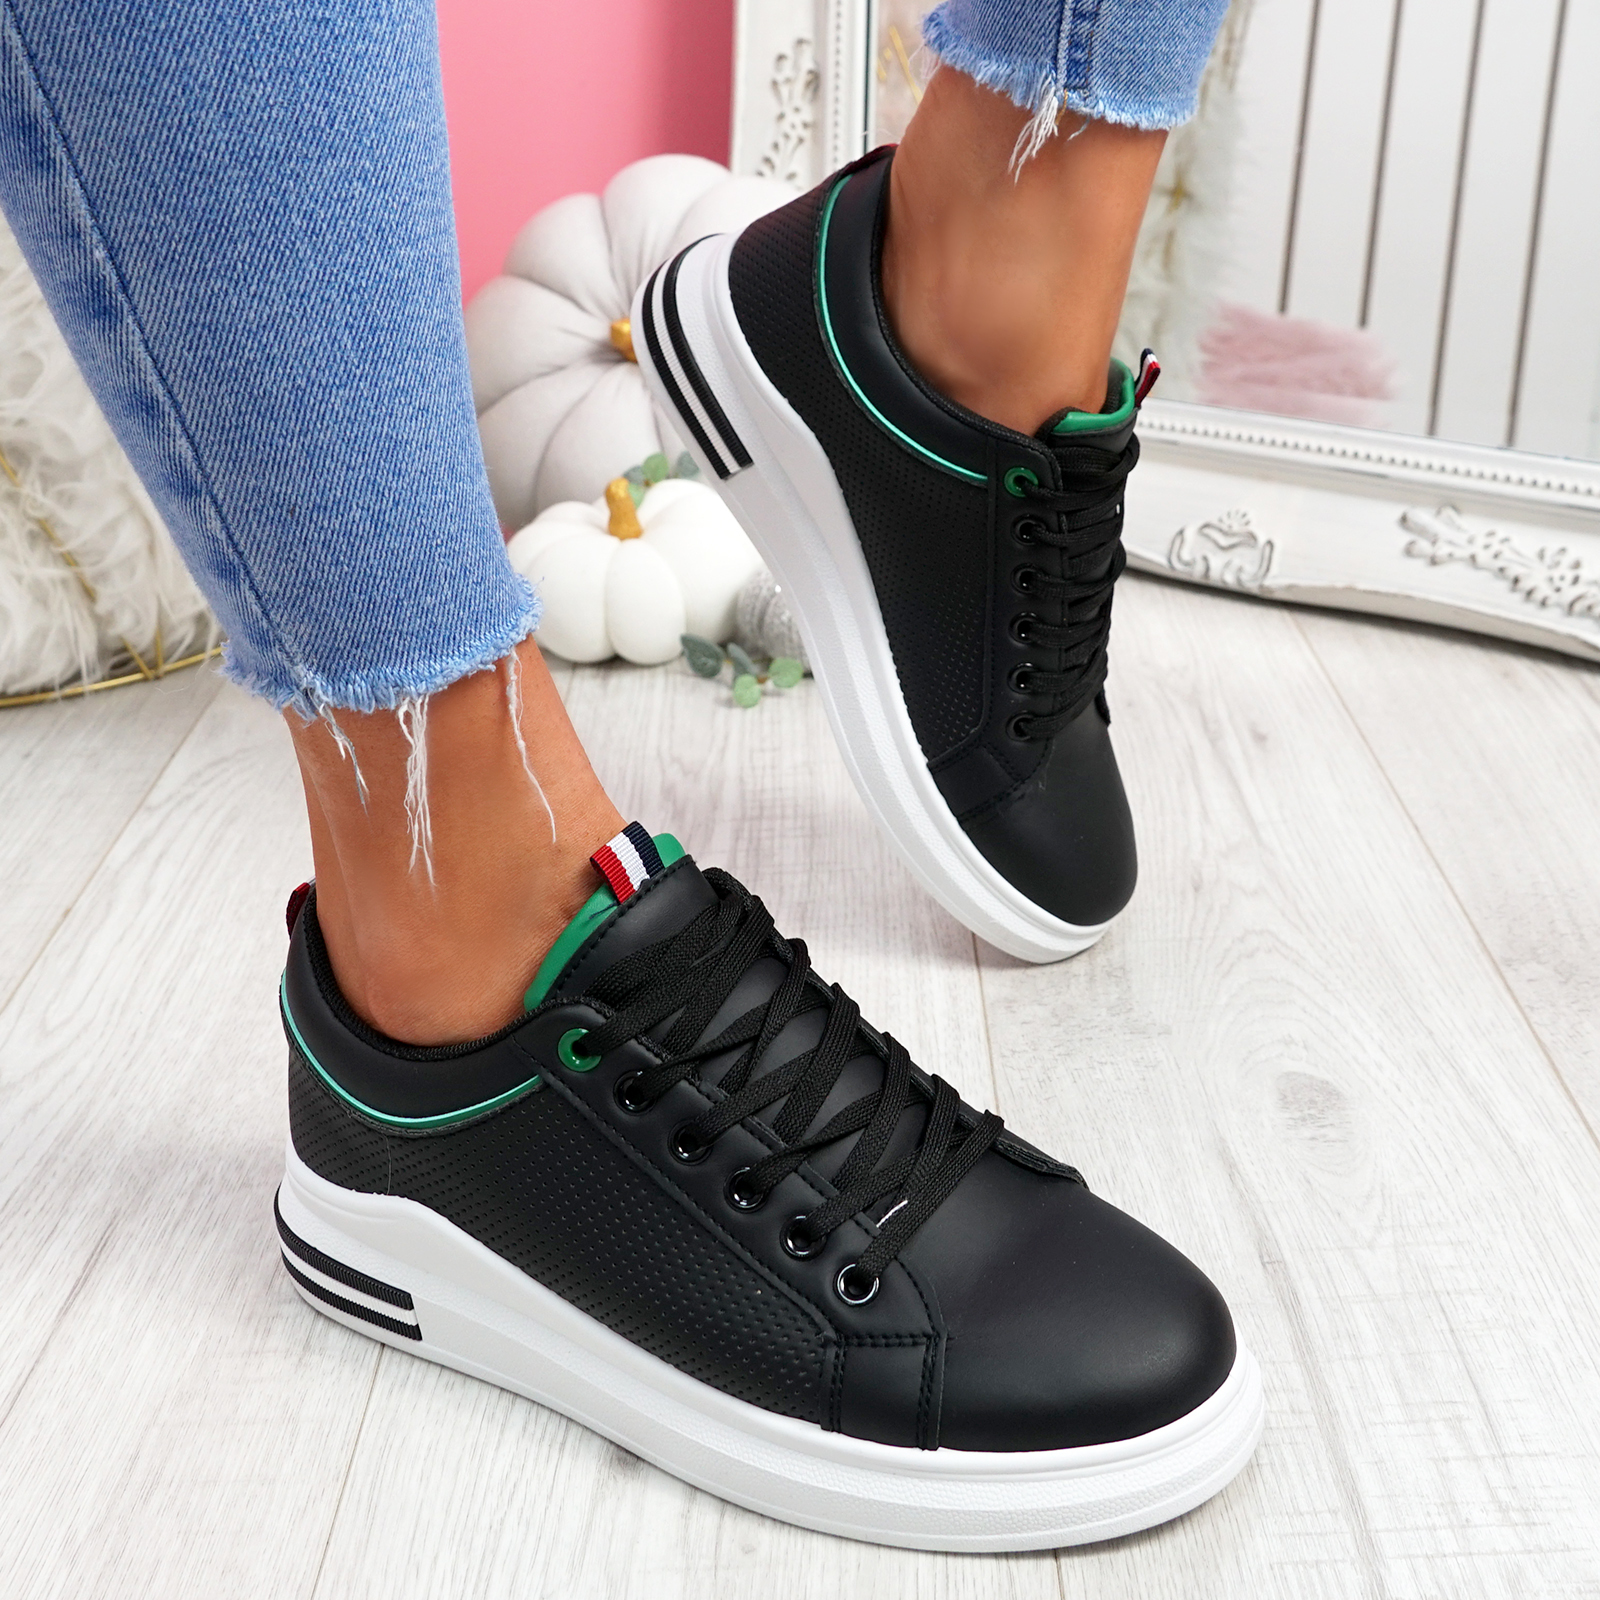 WOMENS LADIES LACE UP TRAINERS COMFY SNEAKERS PLIMSOLLS WOMEN SHOES SIZE UK 3-8